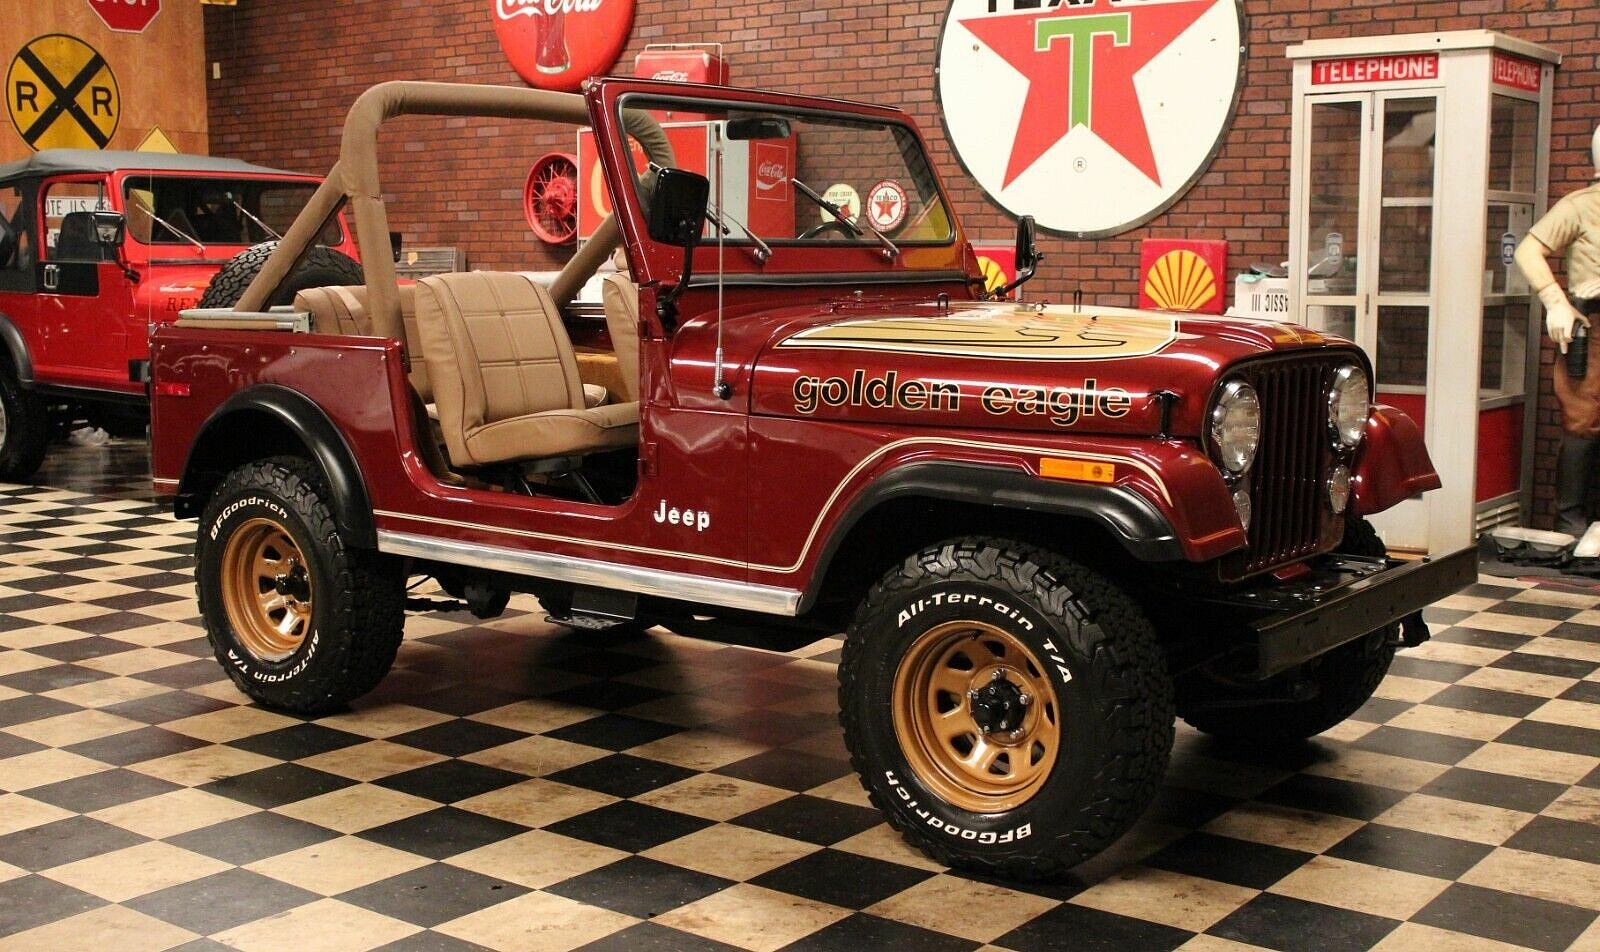 Vintage off-roader: Jeep CJ-7 Golden Eagle - right front profile, without top